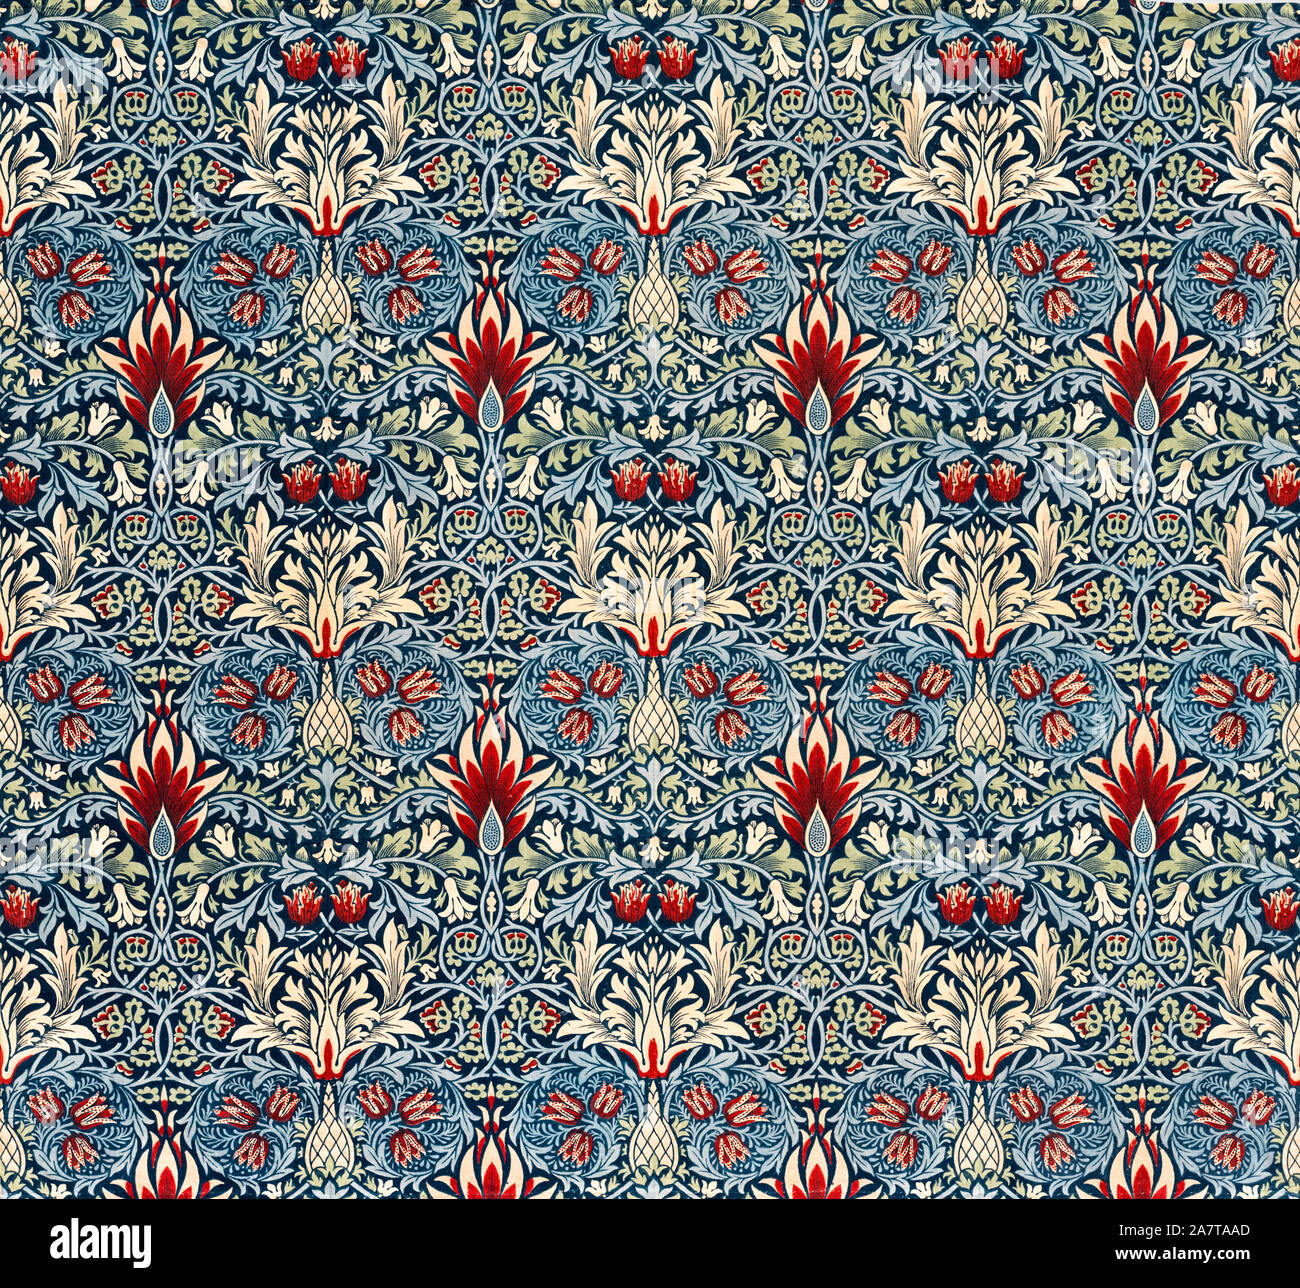 William Morris, tessuto Pattern, Snakeshead, 1920, Arts and Crafts Movement Foto Stock